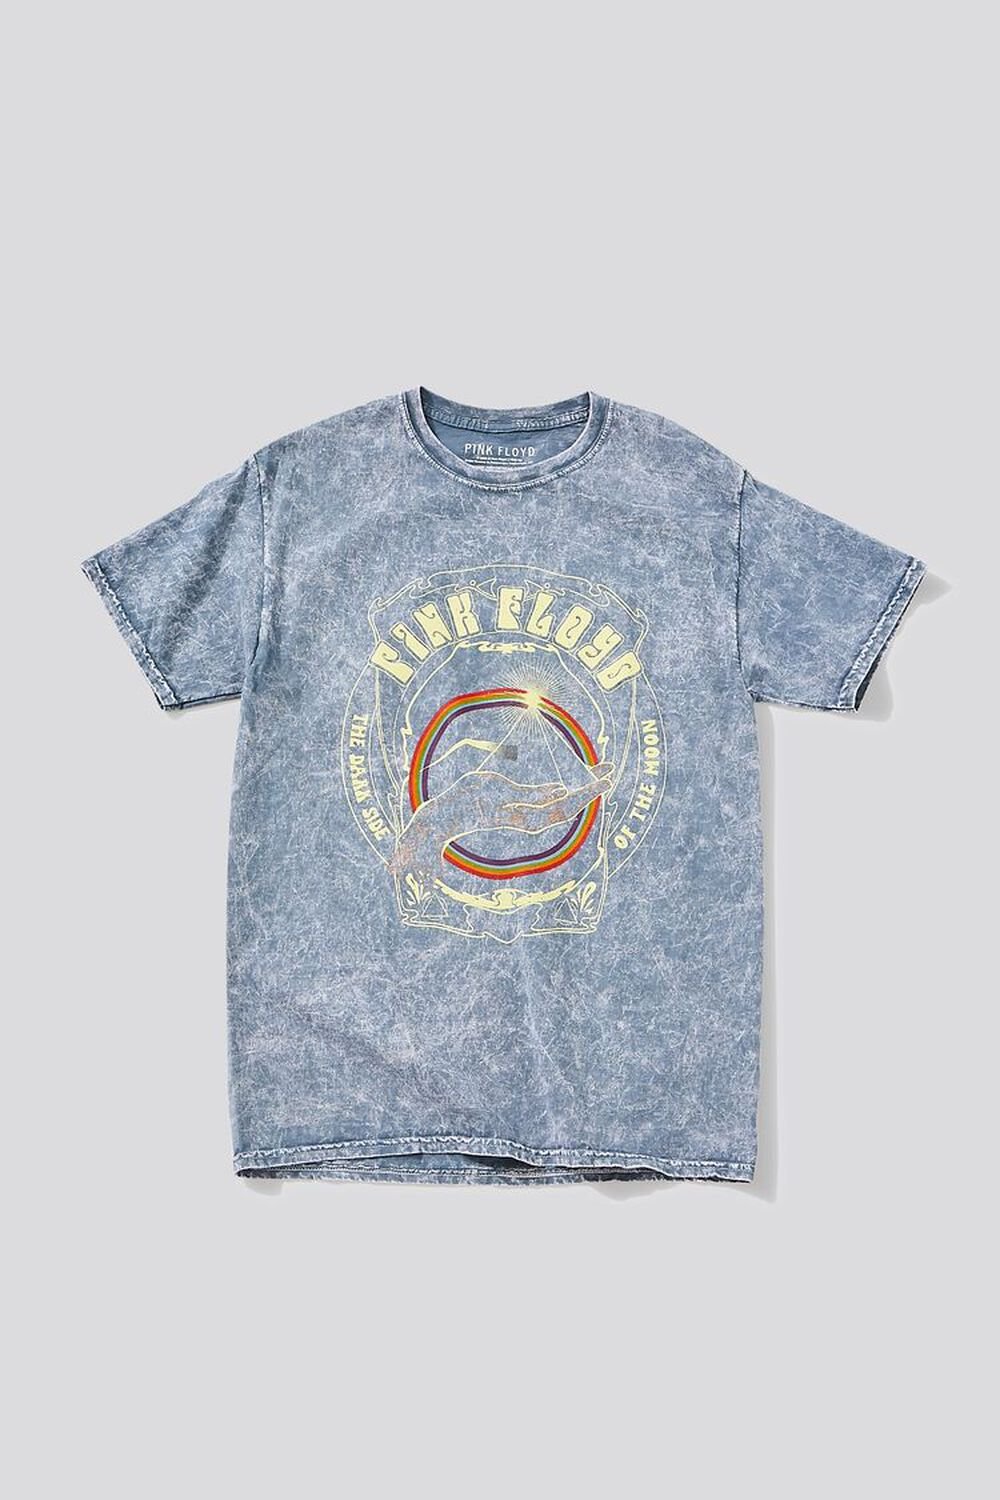 GREY/MULTI Pink Floyd Graphic Mineral Wash Tee, image 1